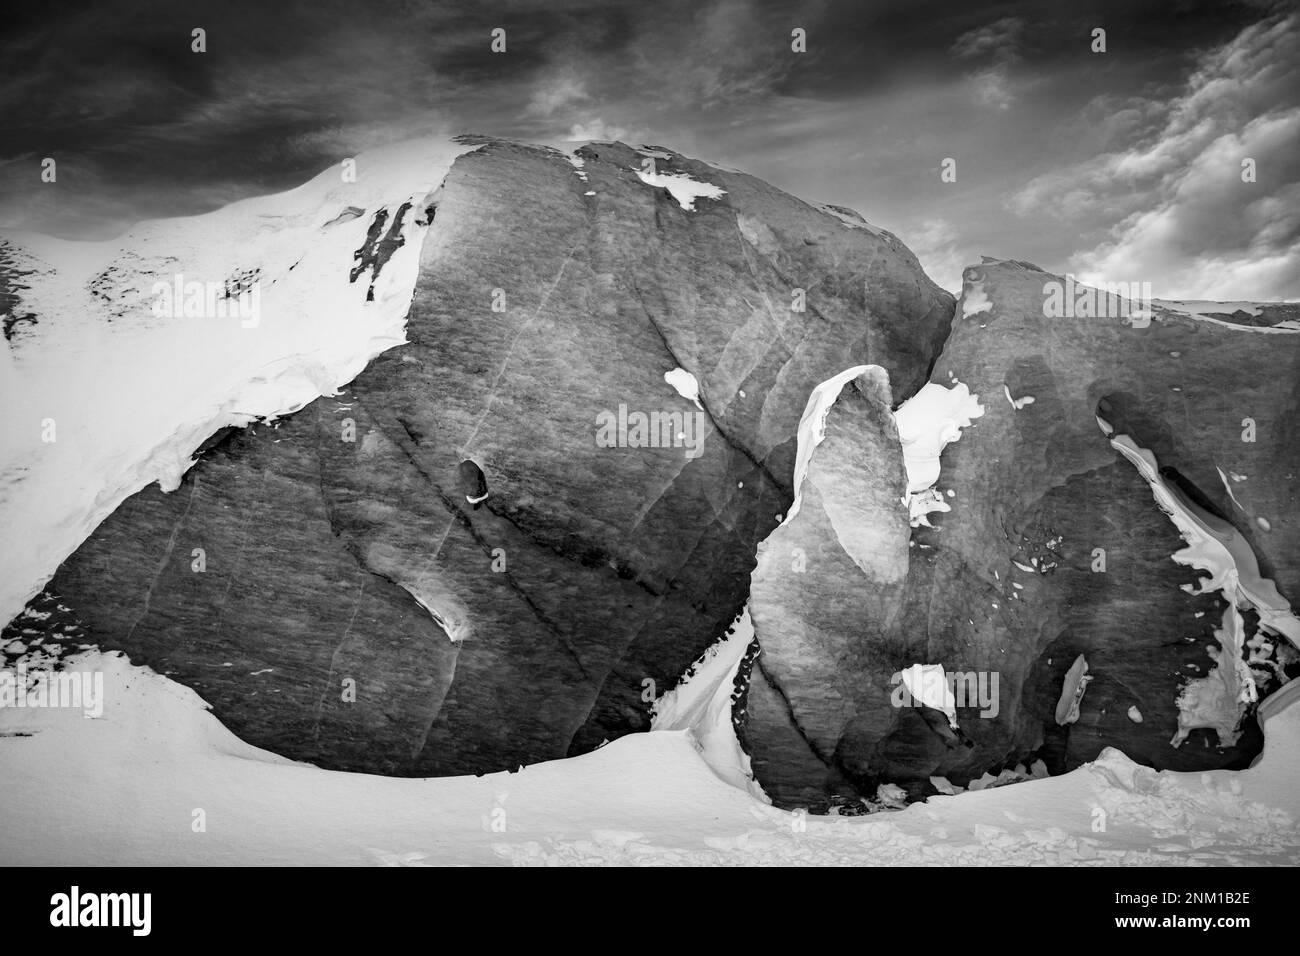 A high contrast black and white shot of a large rock formation on a snow-covered mountain peak Stock Photo